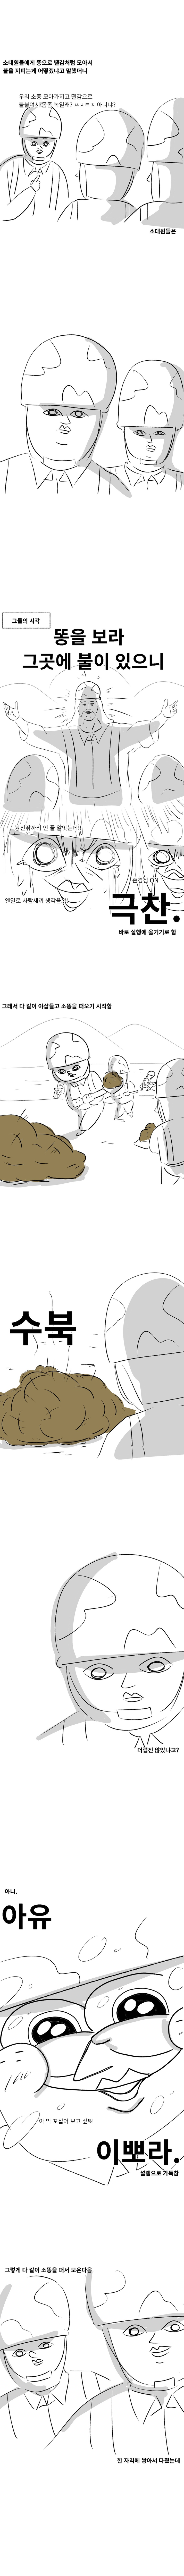 My army story (I shouldn't have done that) manhwa